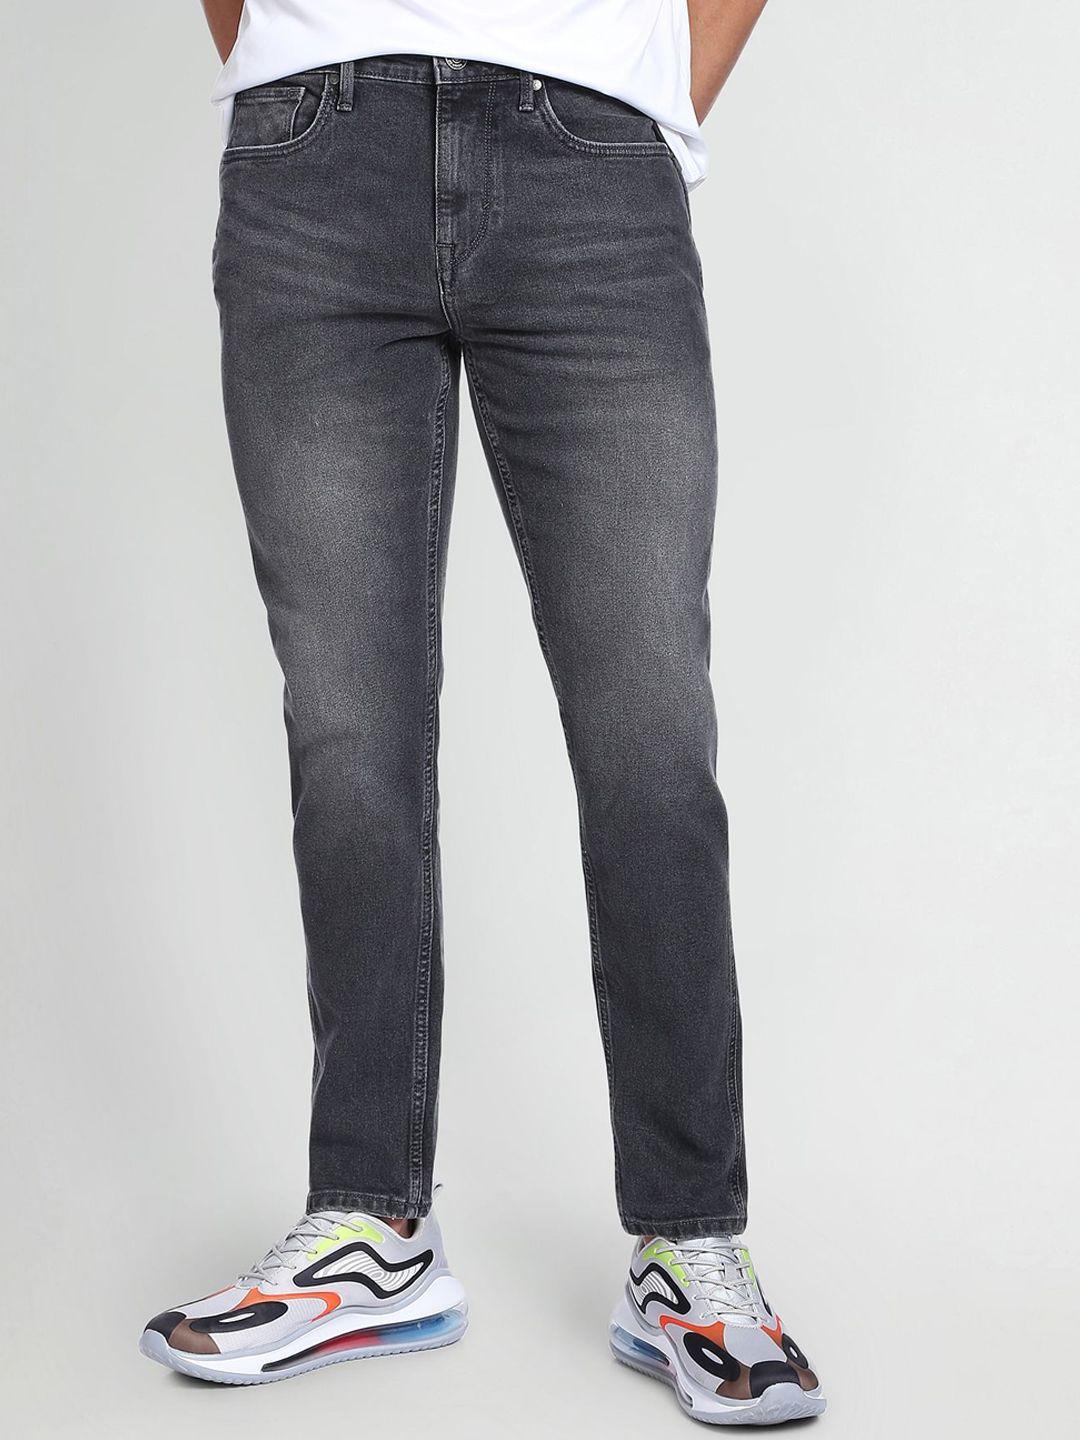 flying-machine-slim-tapered-fit-whiskered-90s-vintage-jeans